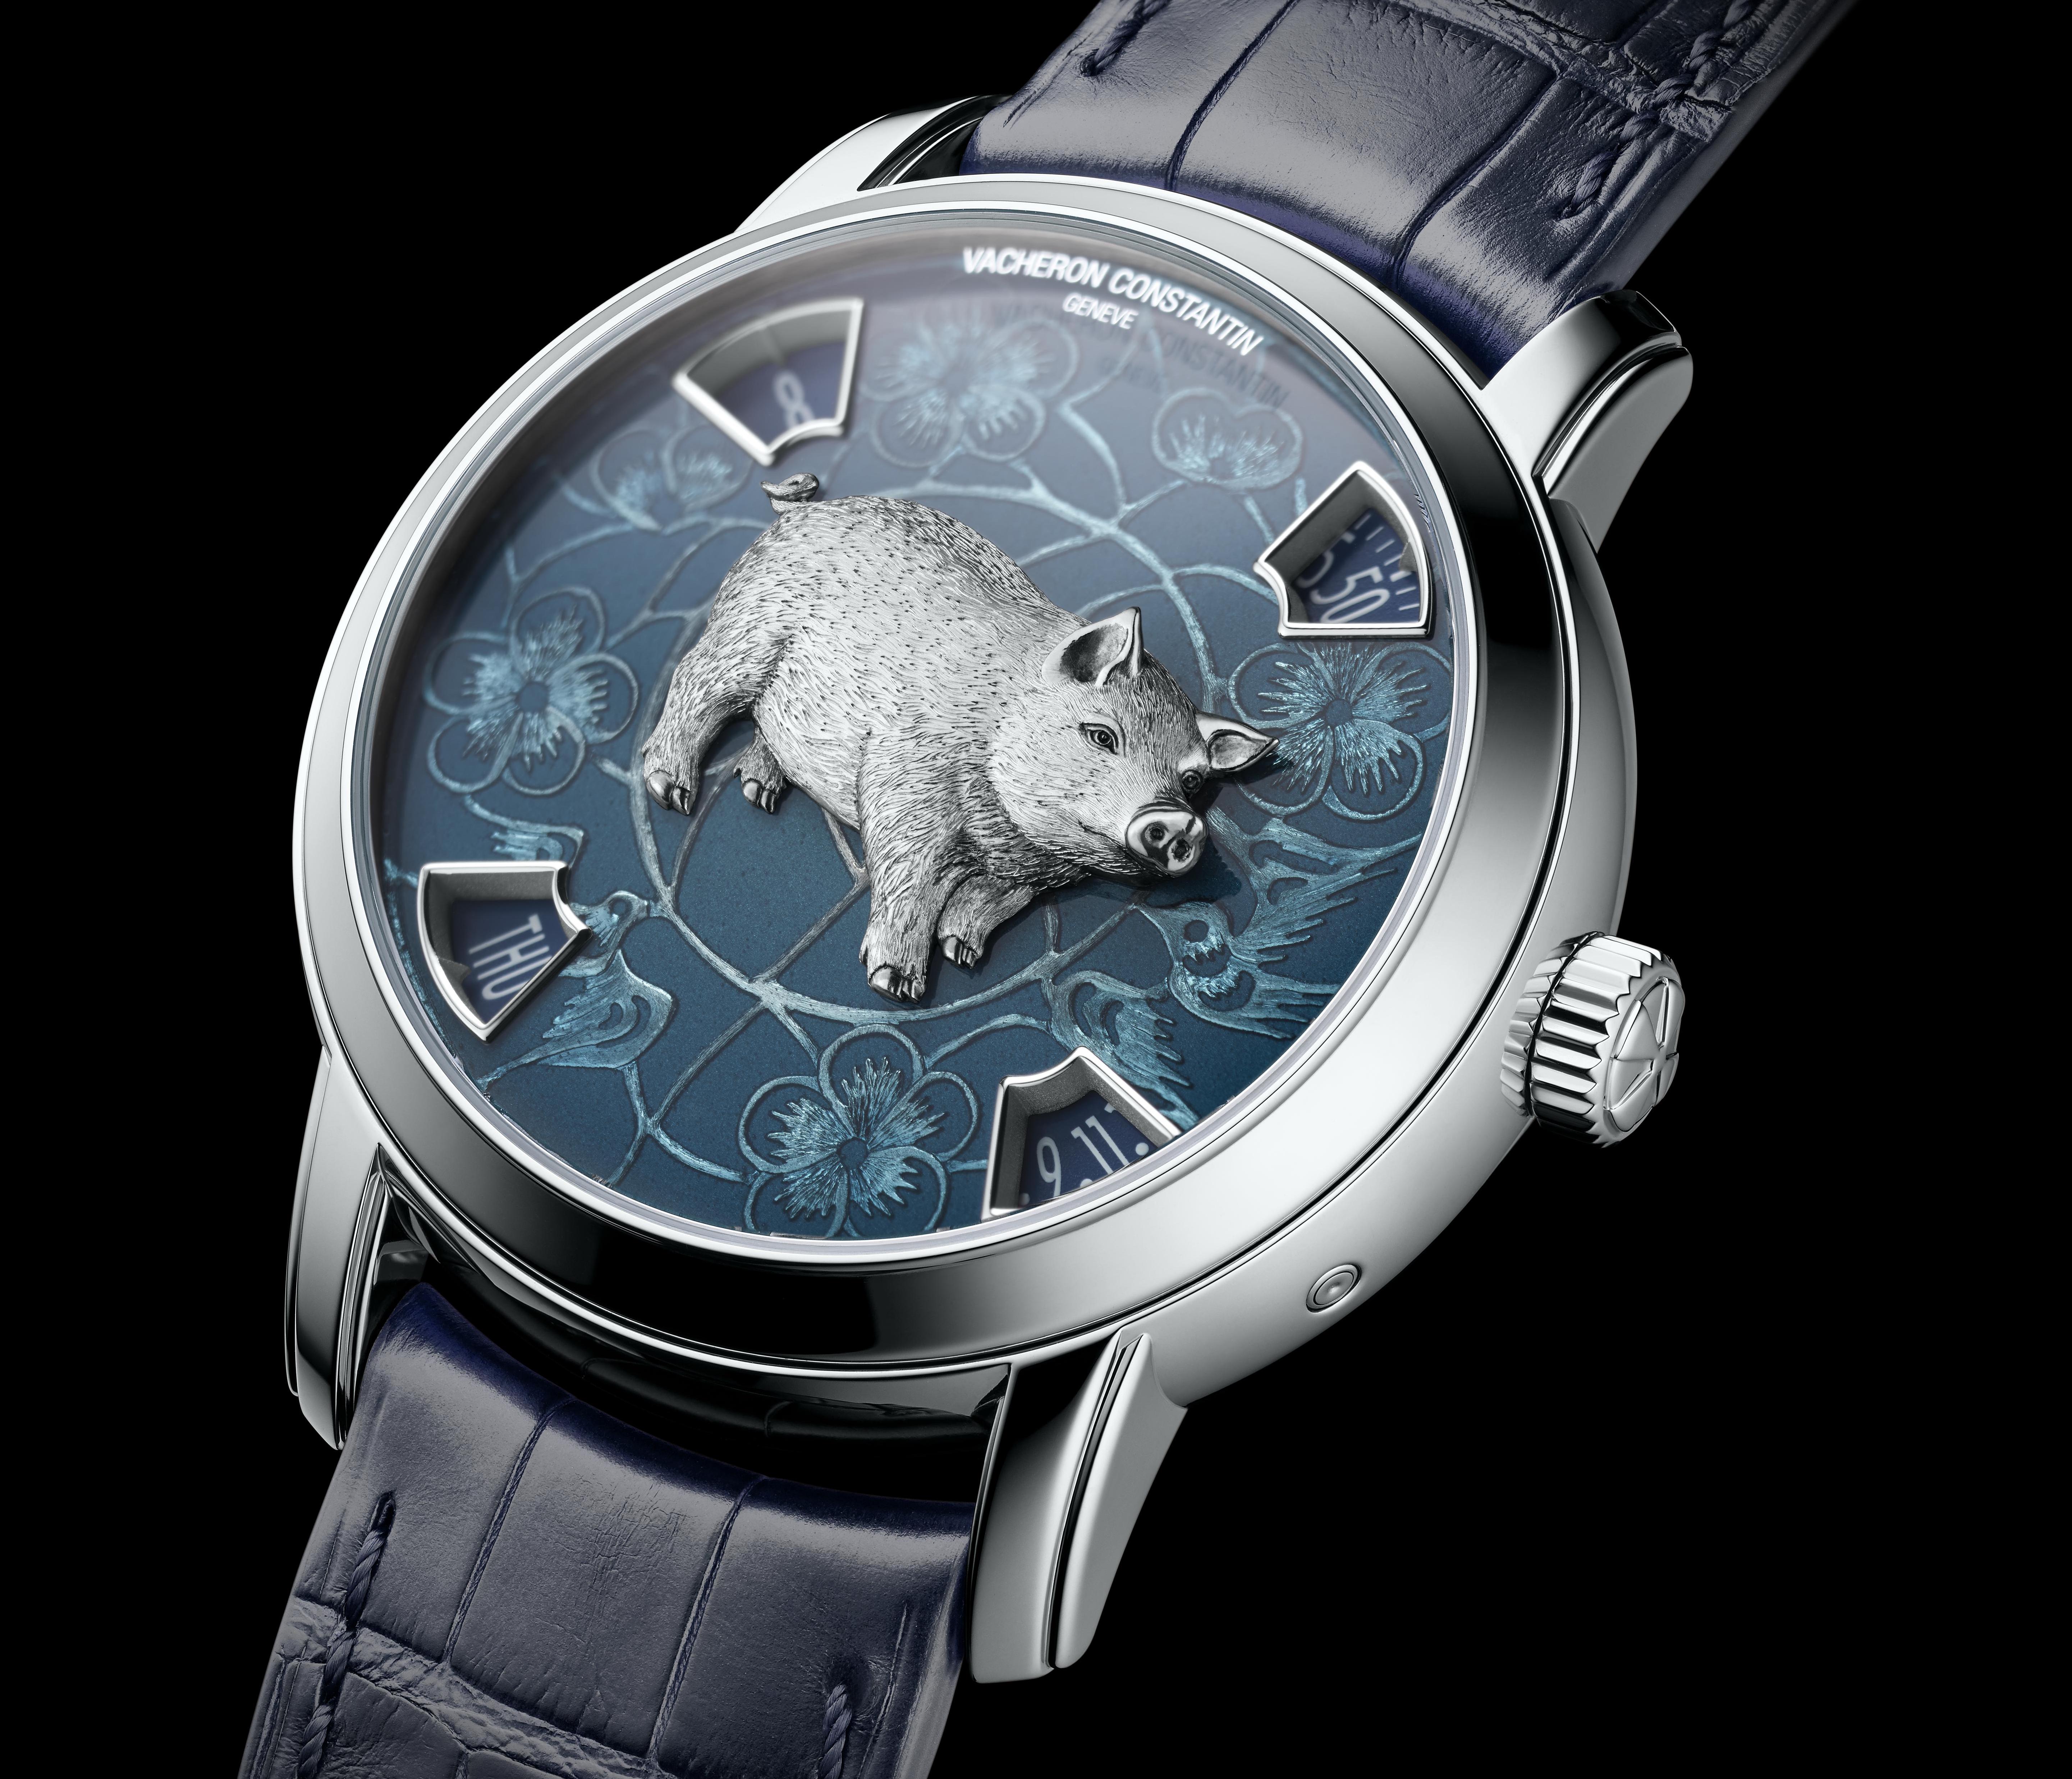 Vacheron Constantin – Métiers d?Art The legend of the Chinese zodiac, Year of the Pig